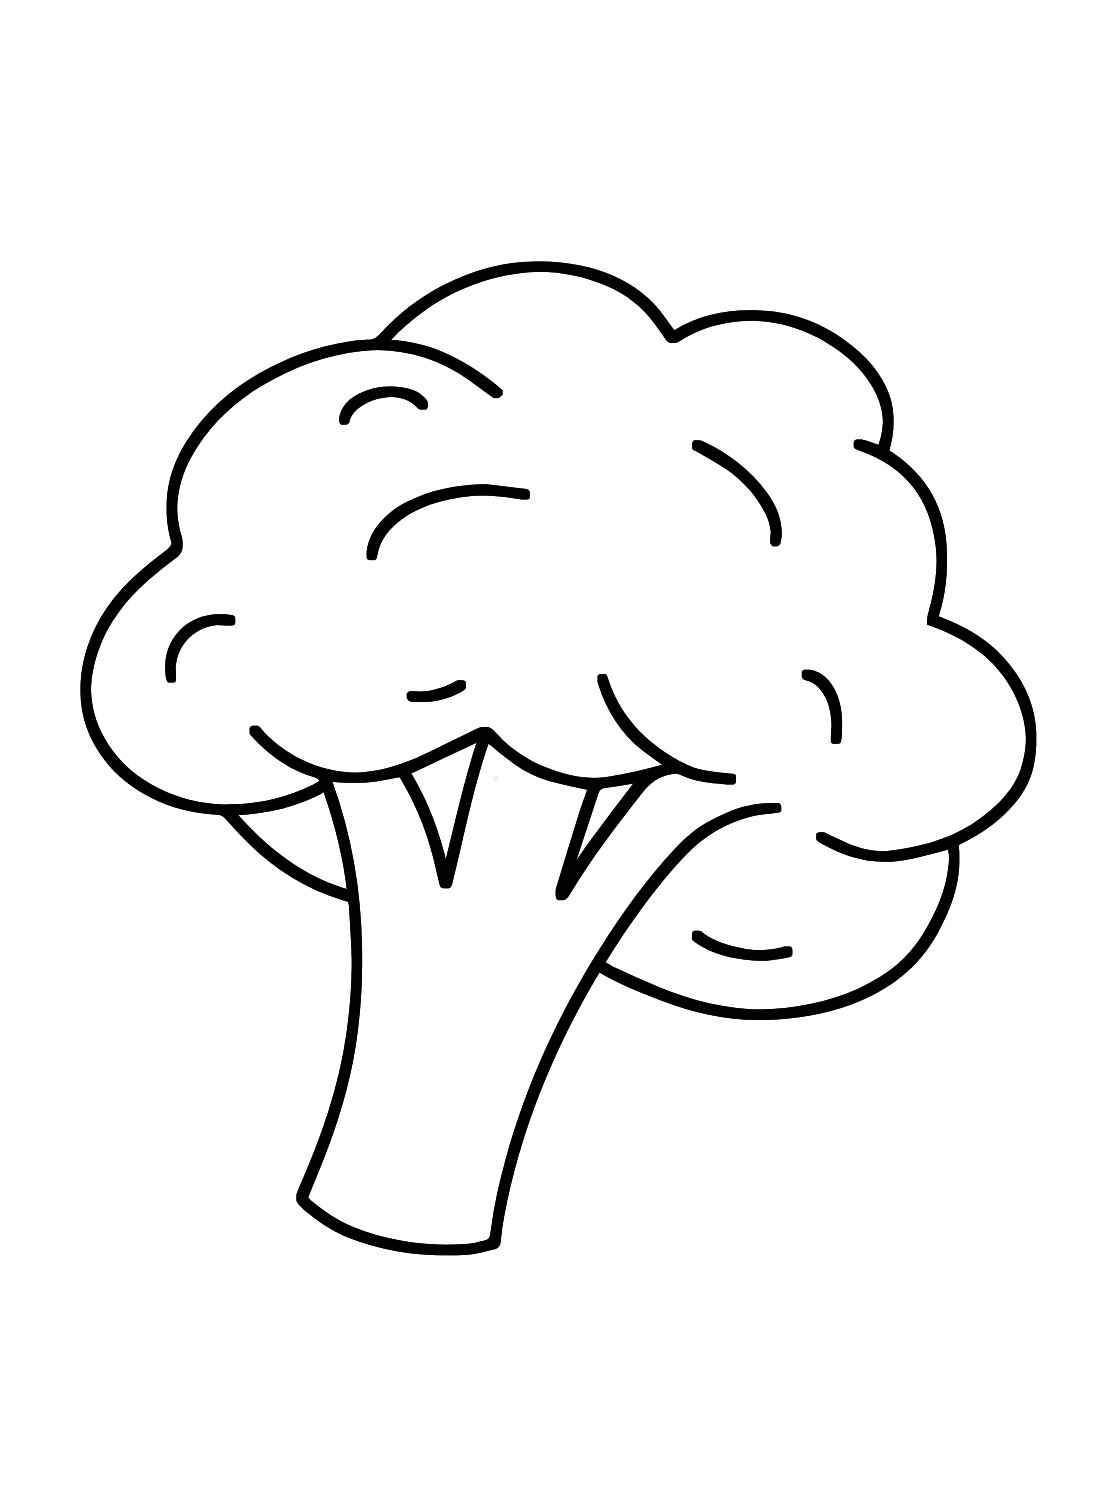 Drawing Broccoli Coloring Pages